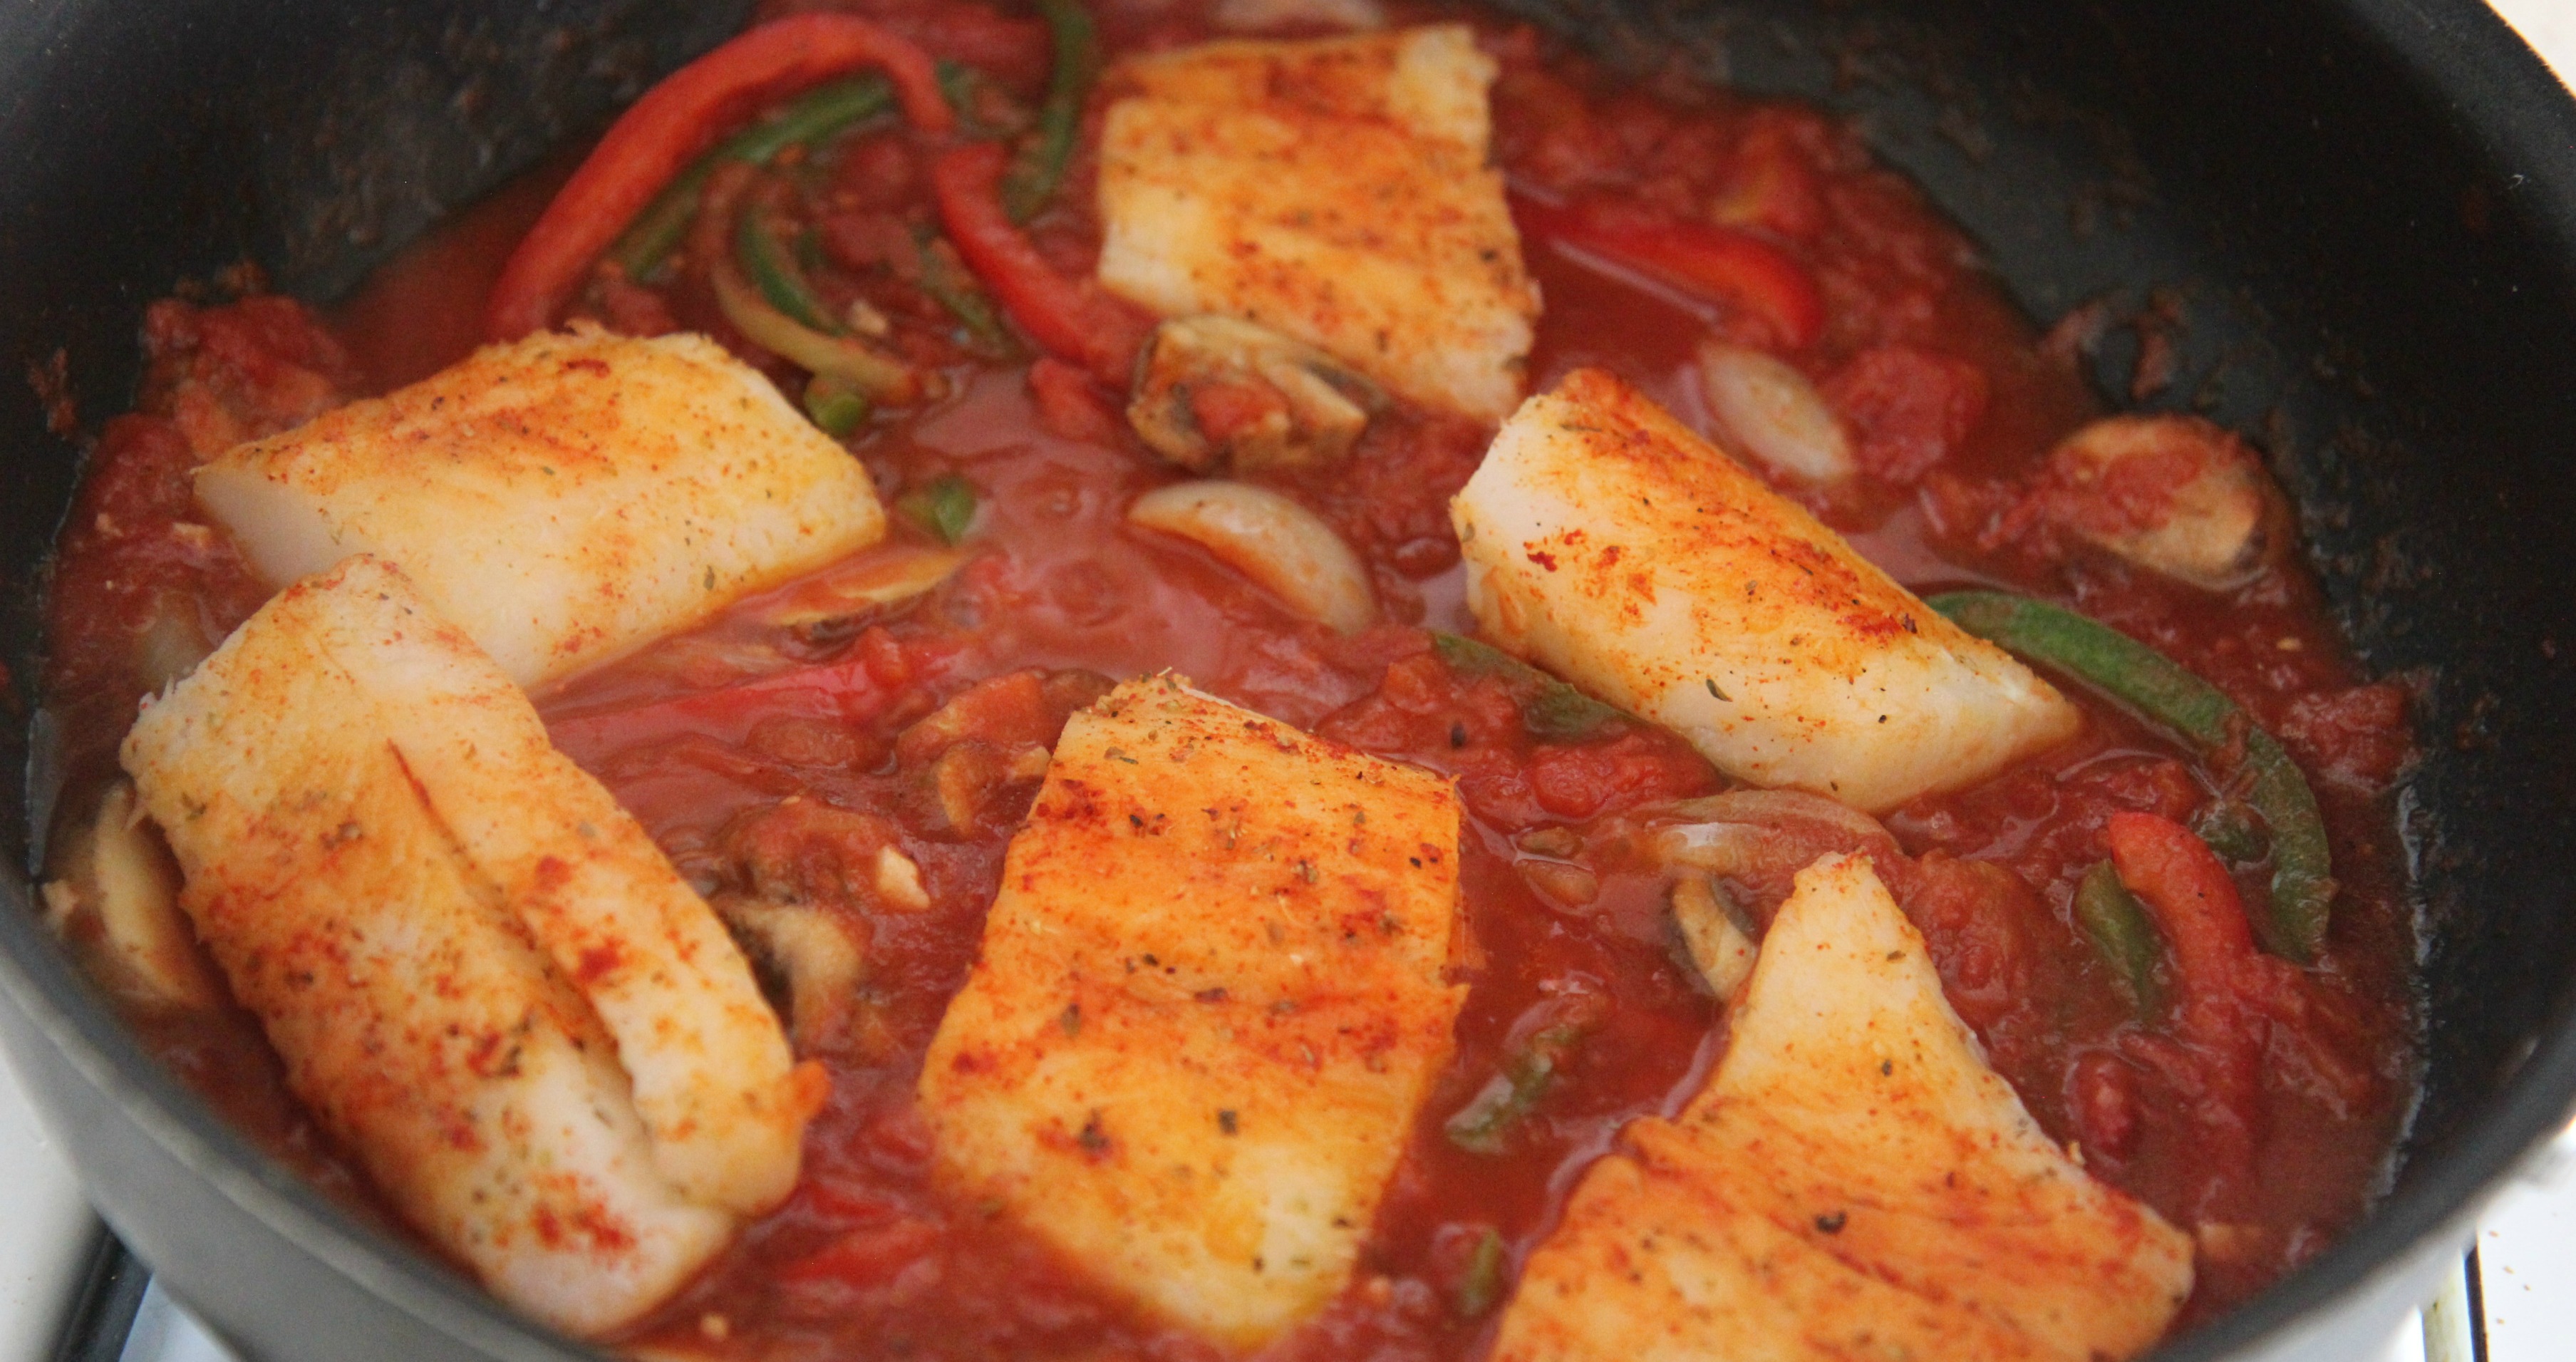 Cook the seasoned cod fish with your tomato sauce and vegetables for 12-15 minutes until fully cooked. 